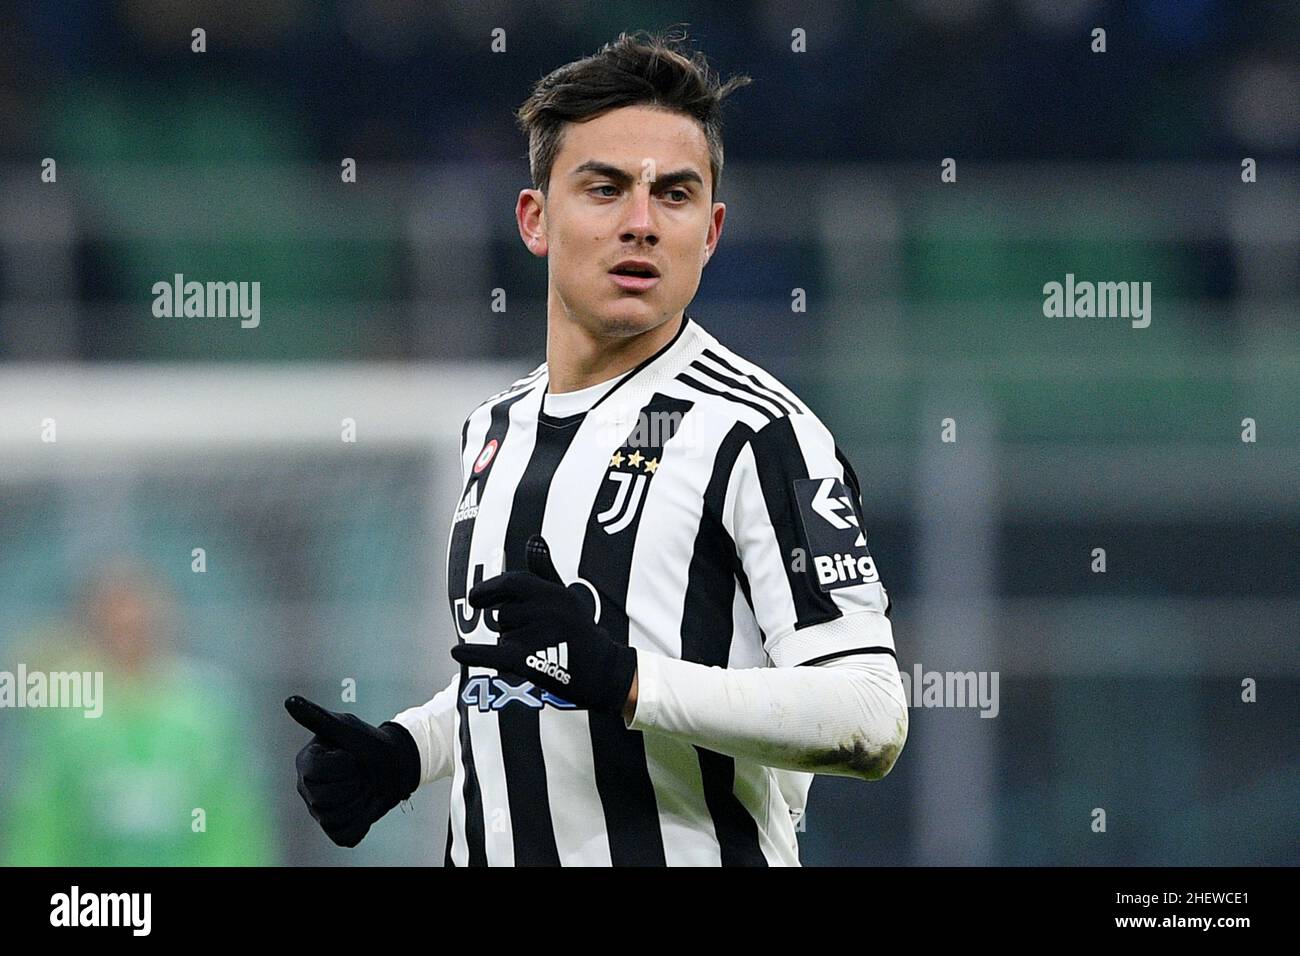 Milan, Italy. 12th Jan, 2022. Paulo Dybala of Juventus FC during the Italian SuperCup Final match between FC Internazionale and Juventus FC at Stadio Giuseppe Meazza, Milan, Italy on 12 January 2022. Credit: Giuseppe Maffia/Alamy Live News Stock Photo